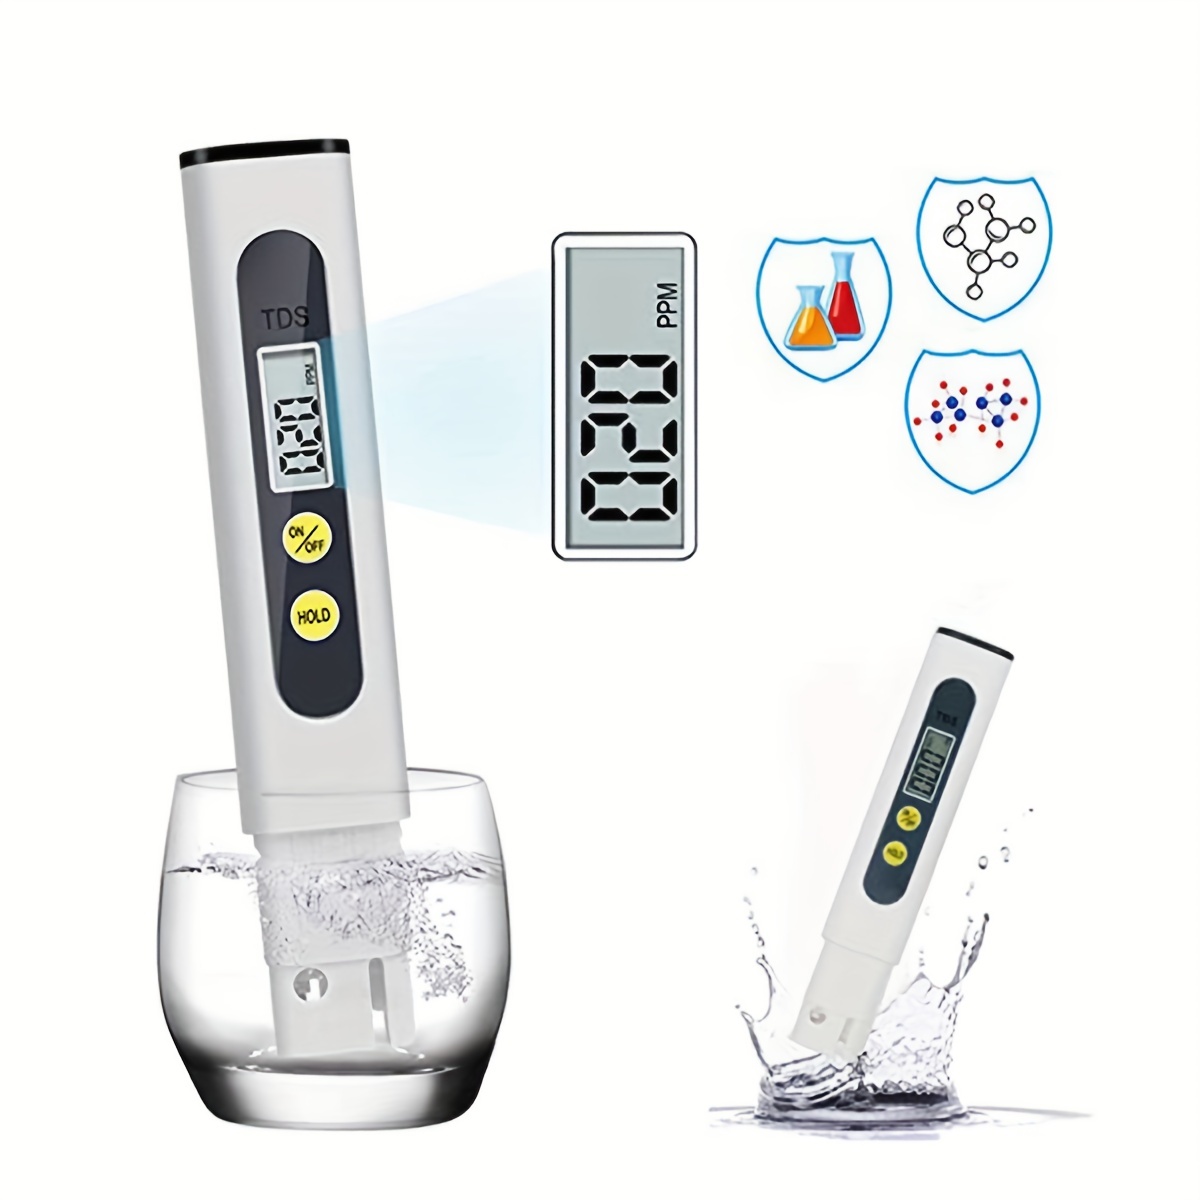 

Tds Meter Digital Water Tester 0-9990ppm Drinking Water Quality Analyzer Monitor Filter Portable Digital Lcd Tds-m2 Meter Pen